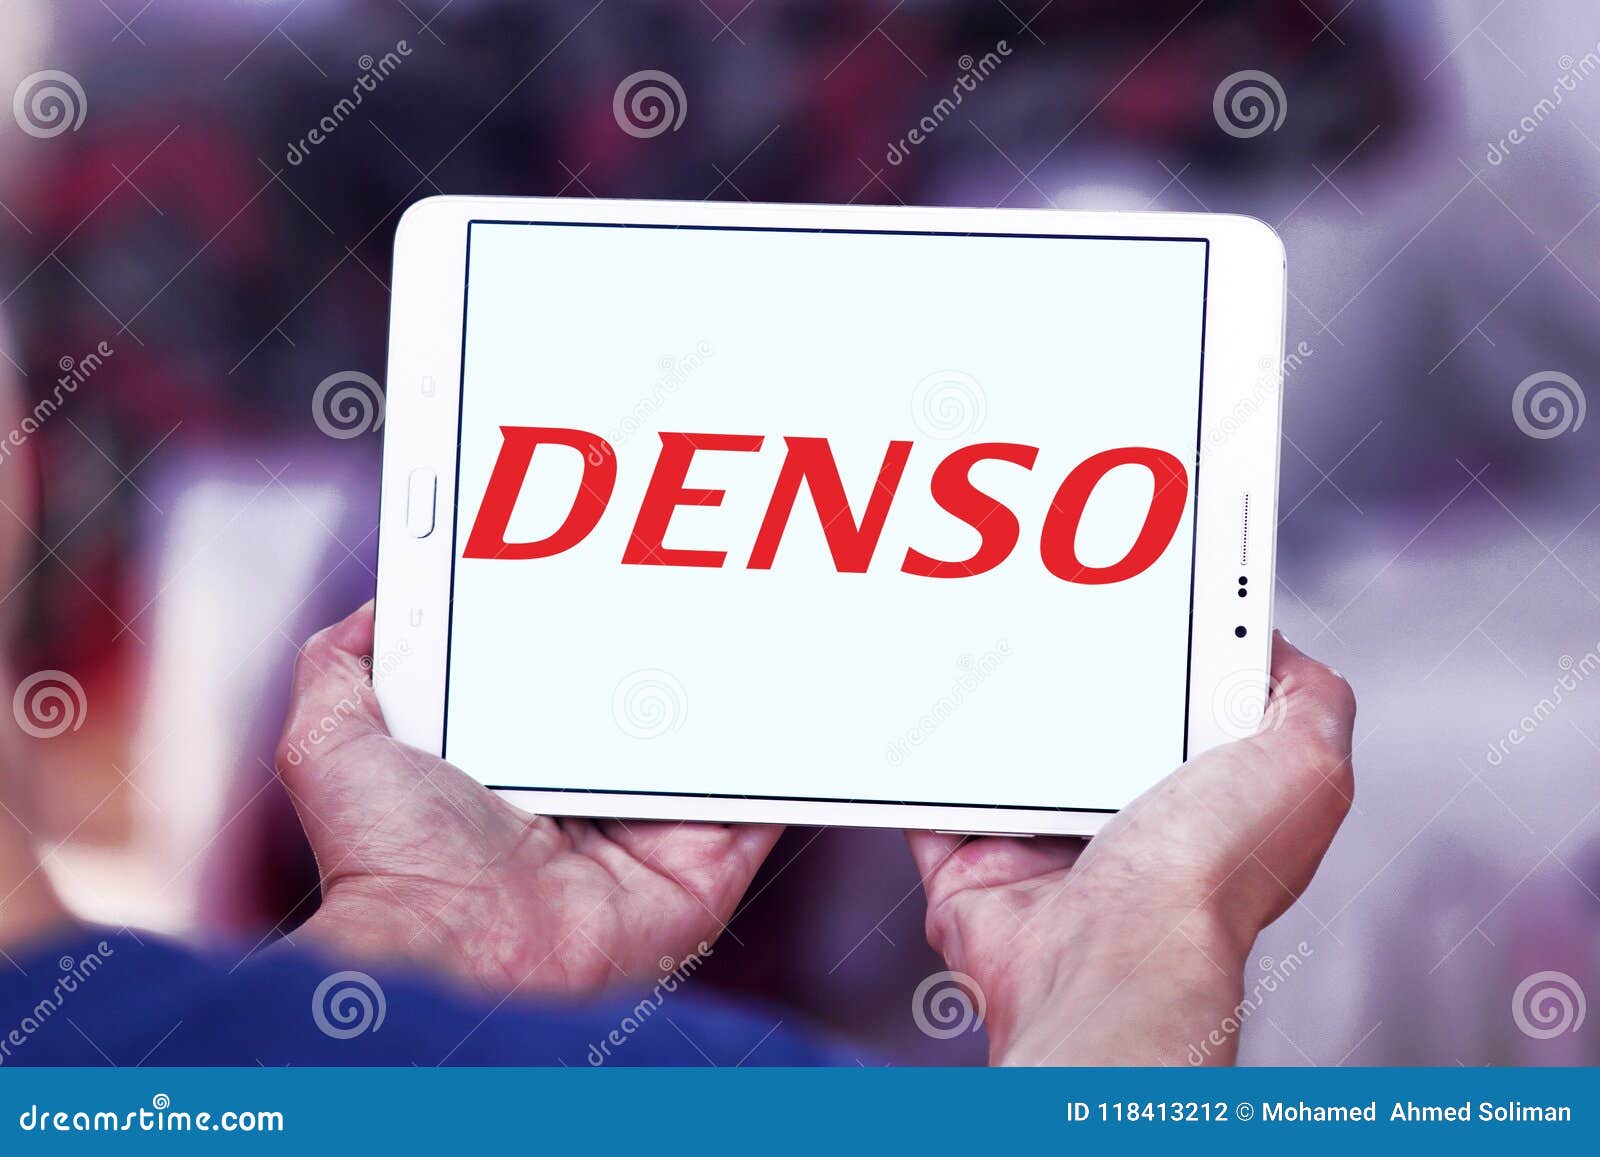 NTT Com, DENSO Collaborate to Provide Security Operation Center for Vehicles